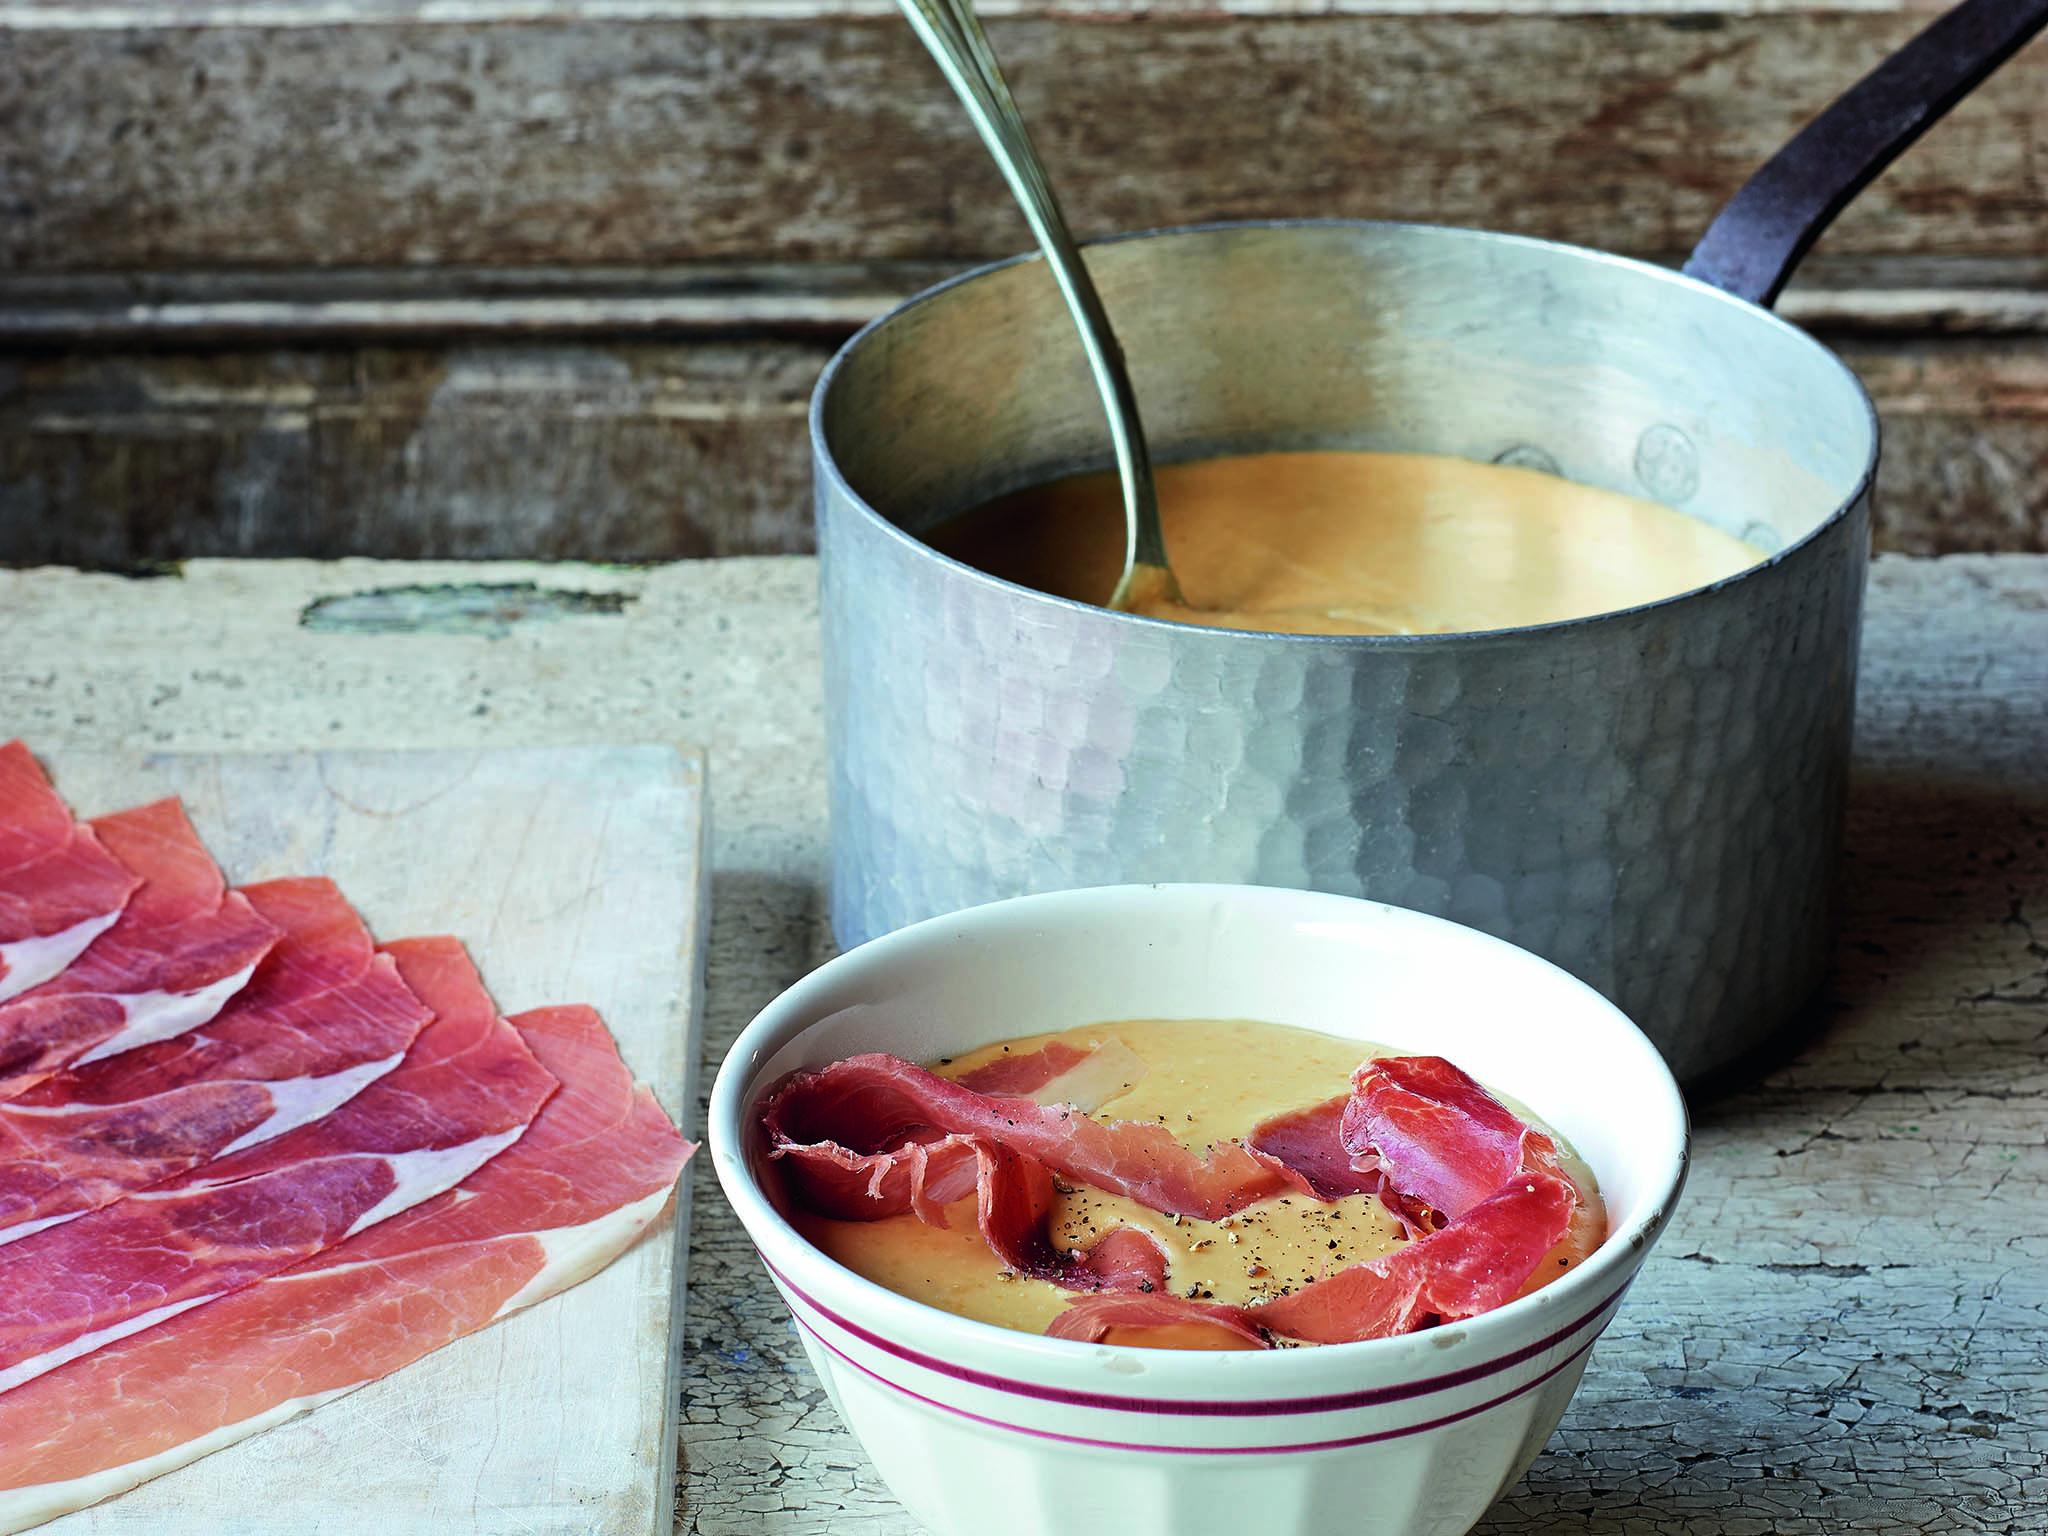 Soak the split peas the day before making this soup, then serve it topped with Bayonne ham